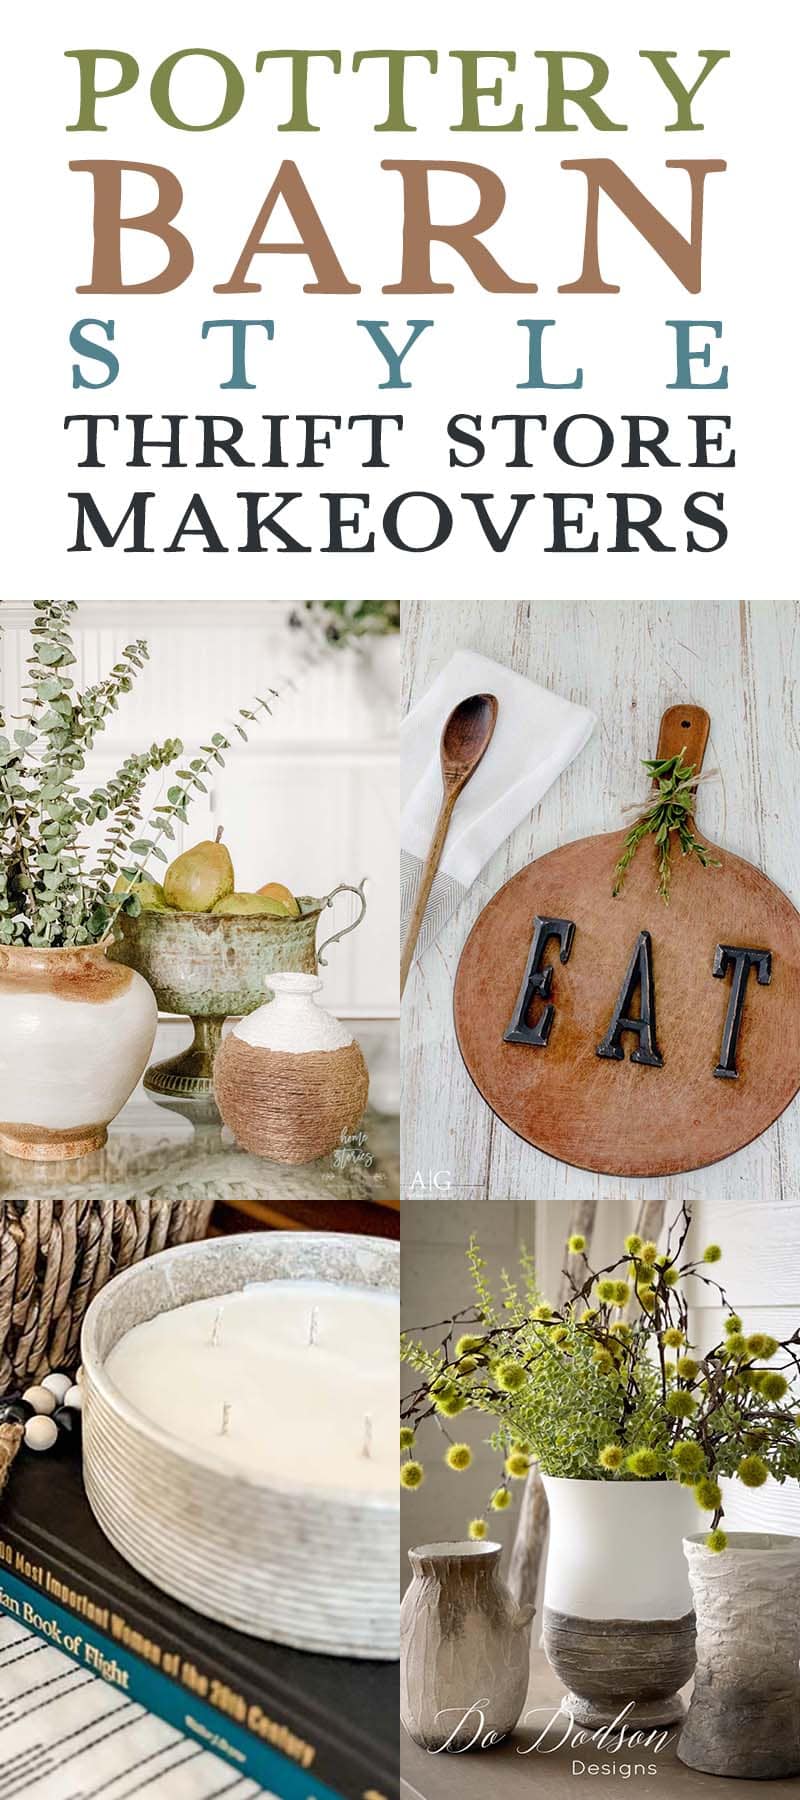 Pottery Barn Style Thrift Store Makeovers are going to Inspire you to create your own original diy project that will be amazingly